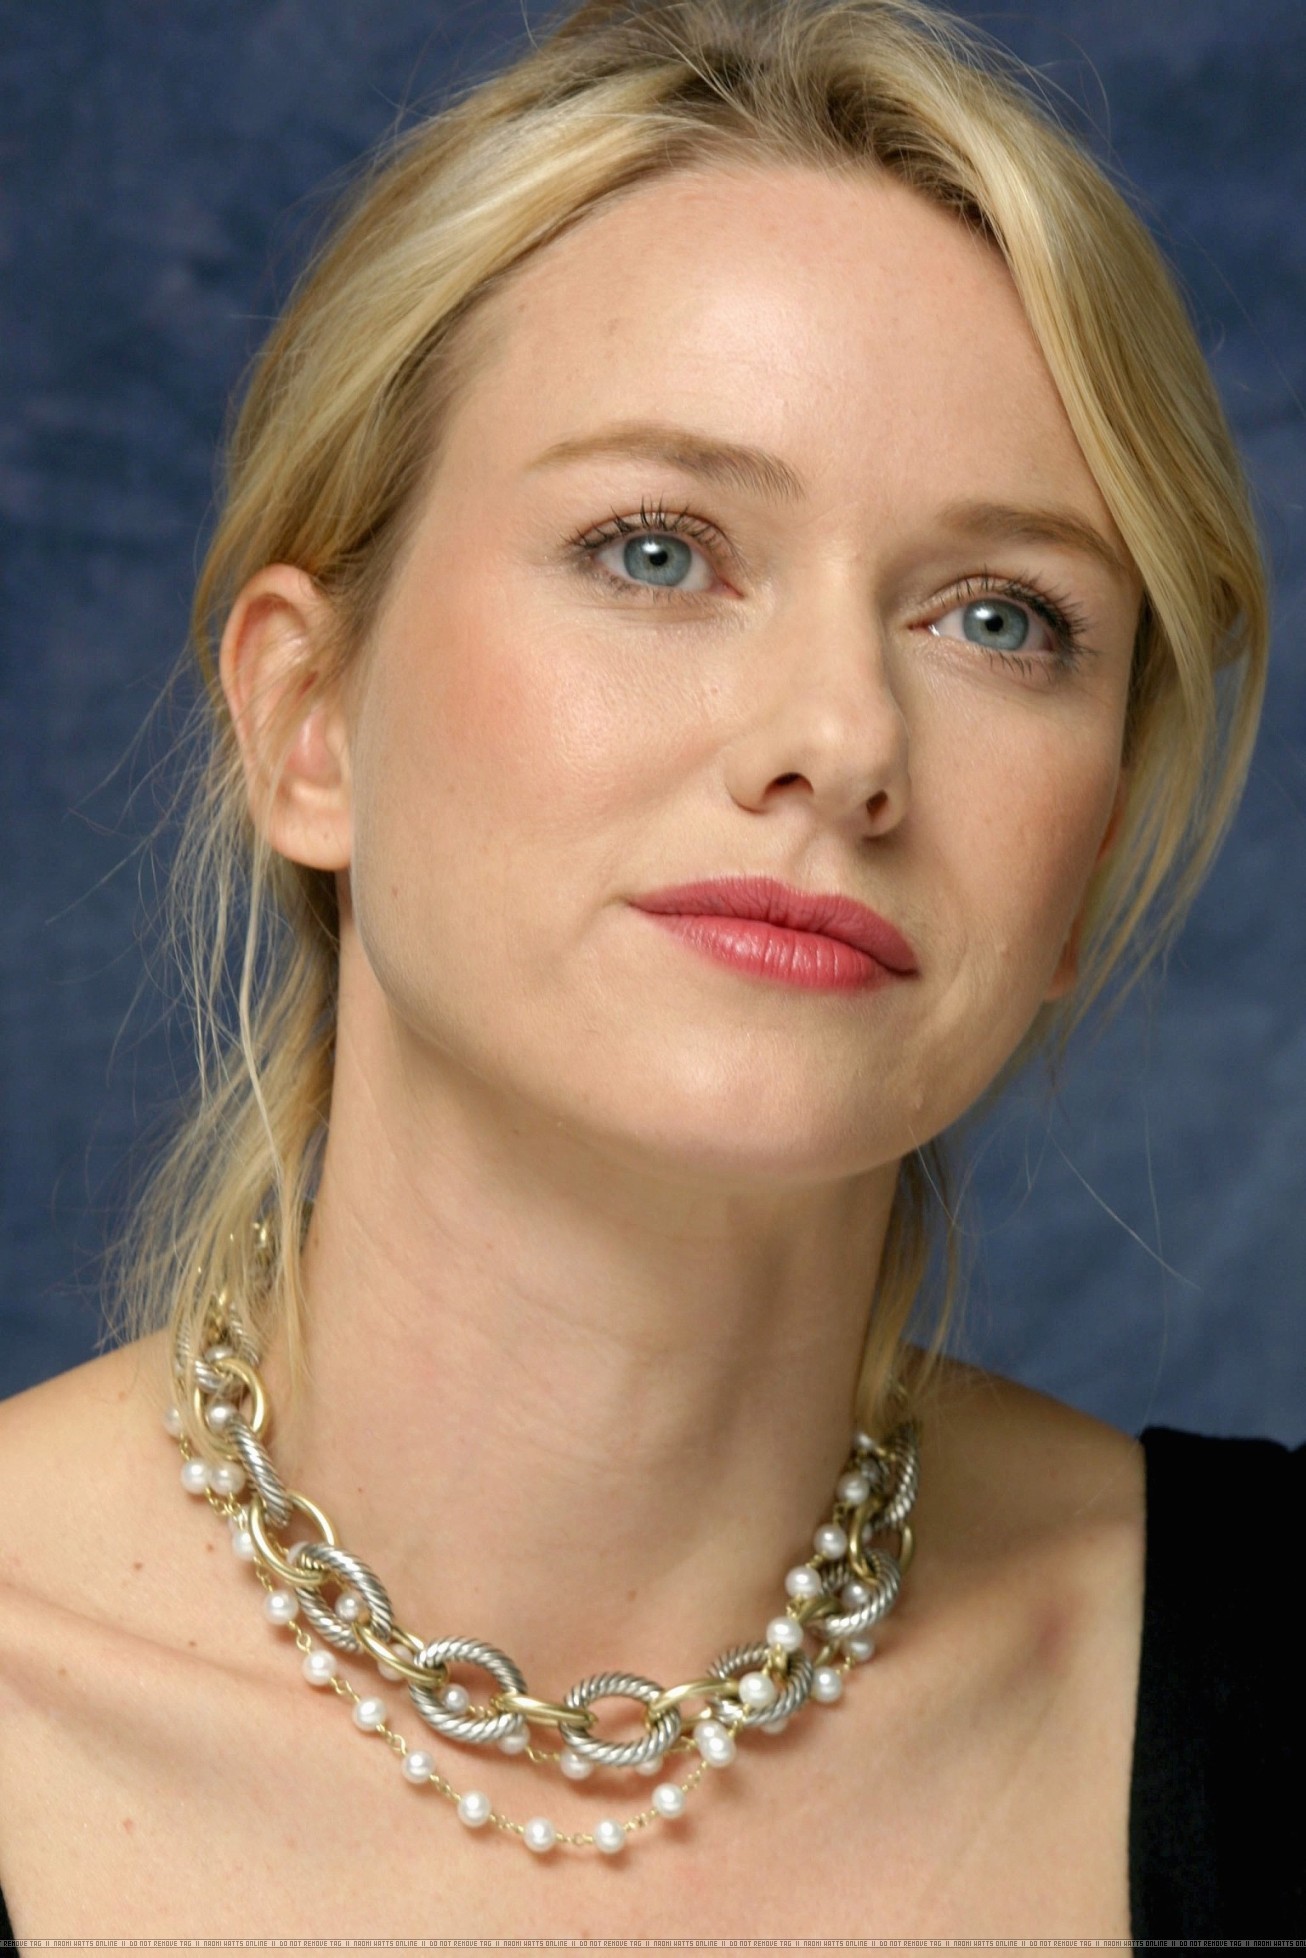 The Painted Veil Press Conference (HQ) - November 5, 2006 